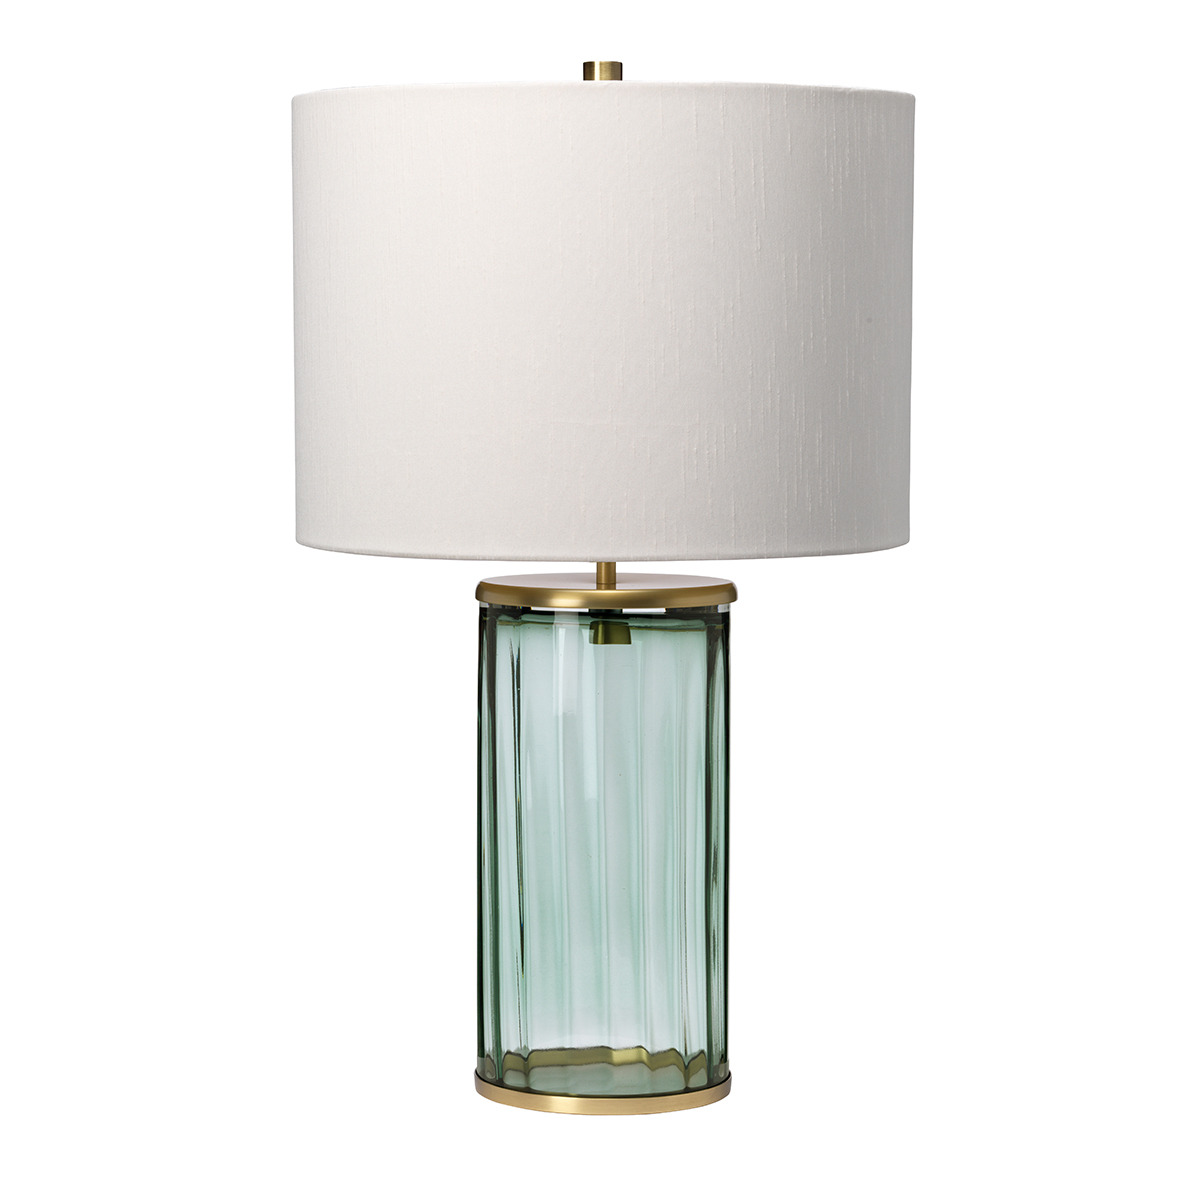 Quintiesse QN-RENO-GREEN-AB Reno Table Lamp With Green Tint Glass Base And Aged Brass Details